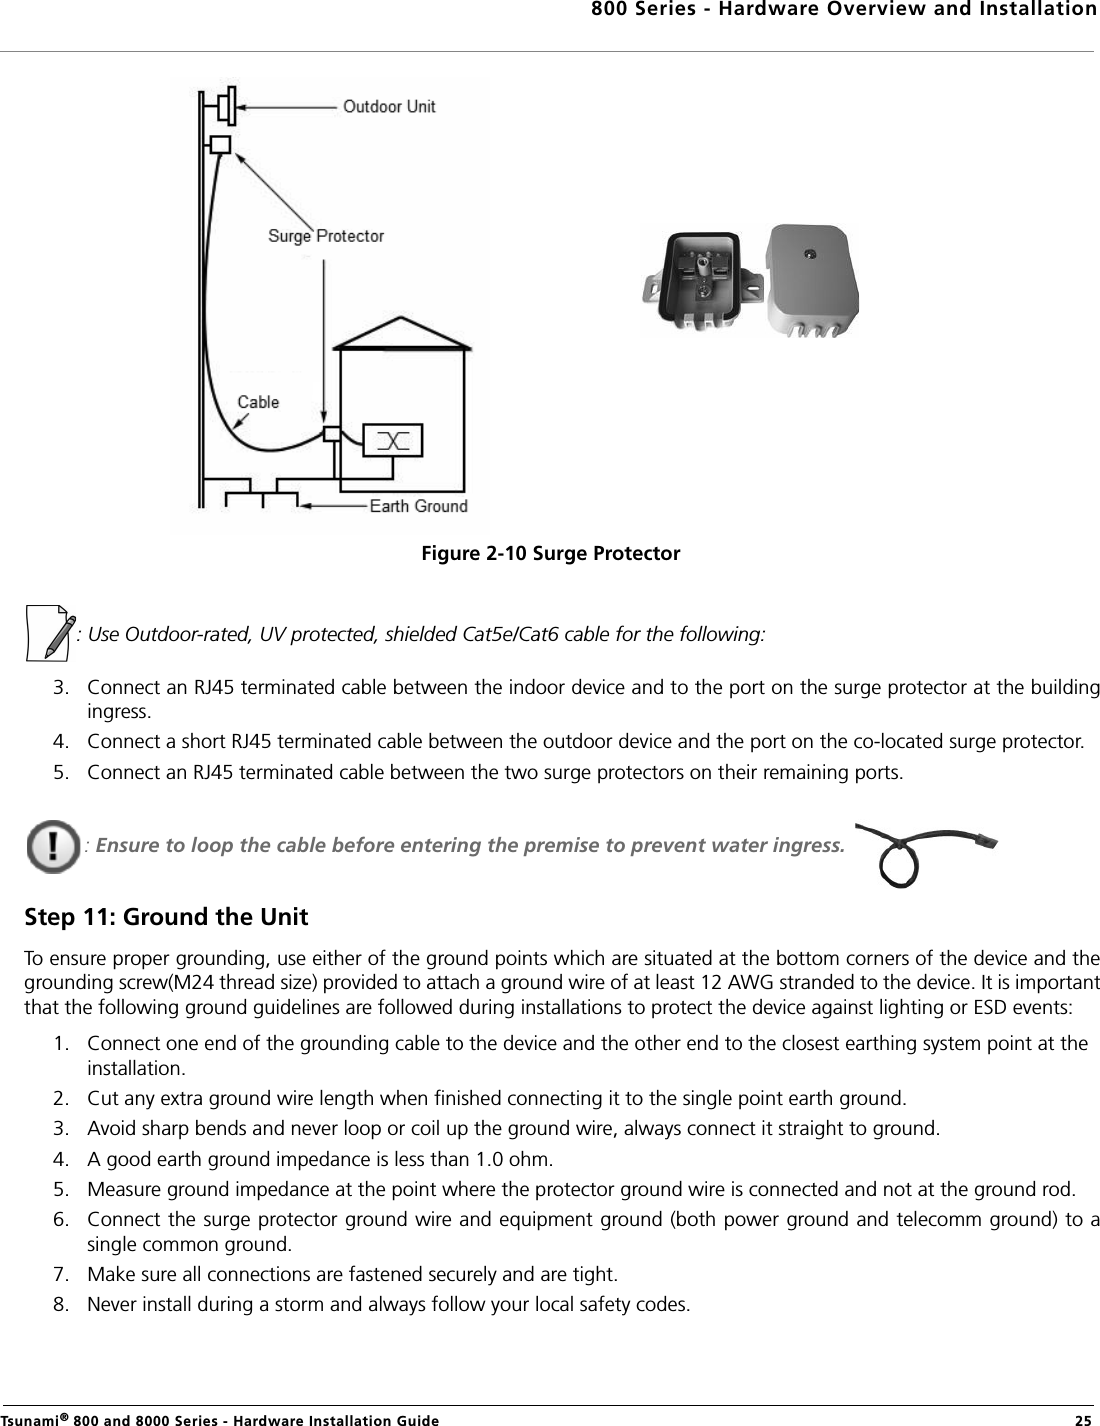 800 Series - Hardware Overview and InstallationTsunami® 800 and 8000 Series - Hardware Installation Guide  25Figure 2-10 Surge Protector: Use Outdoor-rated, UV protected, shielded Cat5e/Cat6 cable for the following:3. Connect an RJ45 terminated cable between the indoor device and to the port on the surge protector at the buildingingress. 4. Connect a short RJ45 terminated cable between the outdoor device and the port on the co-located surge protector.5. Connect an RJ45 terminated cable between the two surge protectors on their remaining ports.: Ensure to loop the cable before entering the premise to prevent water ingress. Step 11: Ground the UnitTo ensure proper grounding, use either of the ground points which are situated at the bottom corners of the device and thegrounding screw(M24 thread size) provided to attach a ground wire of at least 12 AWG stranded to the device. It is importantthat the following ground guidelines are followed during installations to protect the device against lighting or ESD events:1. Connect one end of the grounding cable to the device and the other end to the closest earthing system point at the installation.2. Cut any extra ground wire length when finished connecting it to the single point earth ground. 3. Avoid sharp bends and never loop or coil up the ground wire, always connect it straight to ground.4. A good earth ground impedance is less than 1.0 ohm. 5. Measure ground impedance at the point where the protector ground wire is connected and not at the ground rod.6. Connect the surge protector ground wire and equipment ground (both power ground and telecomm ground) to asingle common ground. 7. Make sure all connections are fastened securely and are tight. 8. Never install during a storm and always follow your local safety codes. 